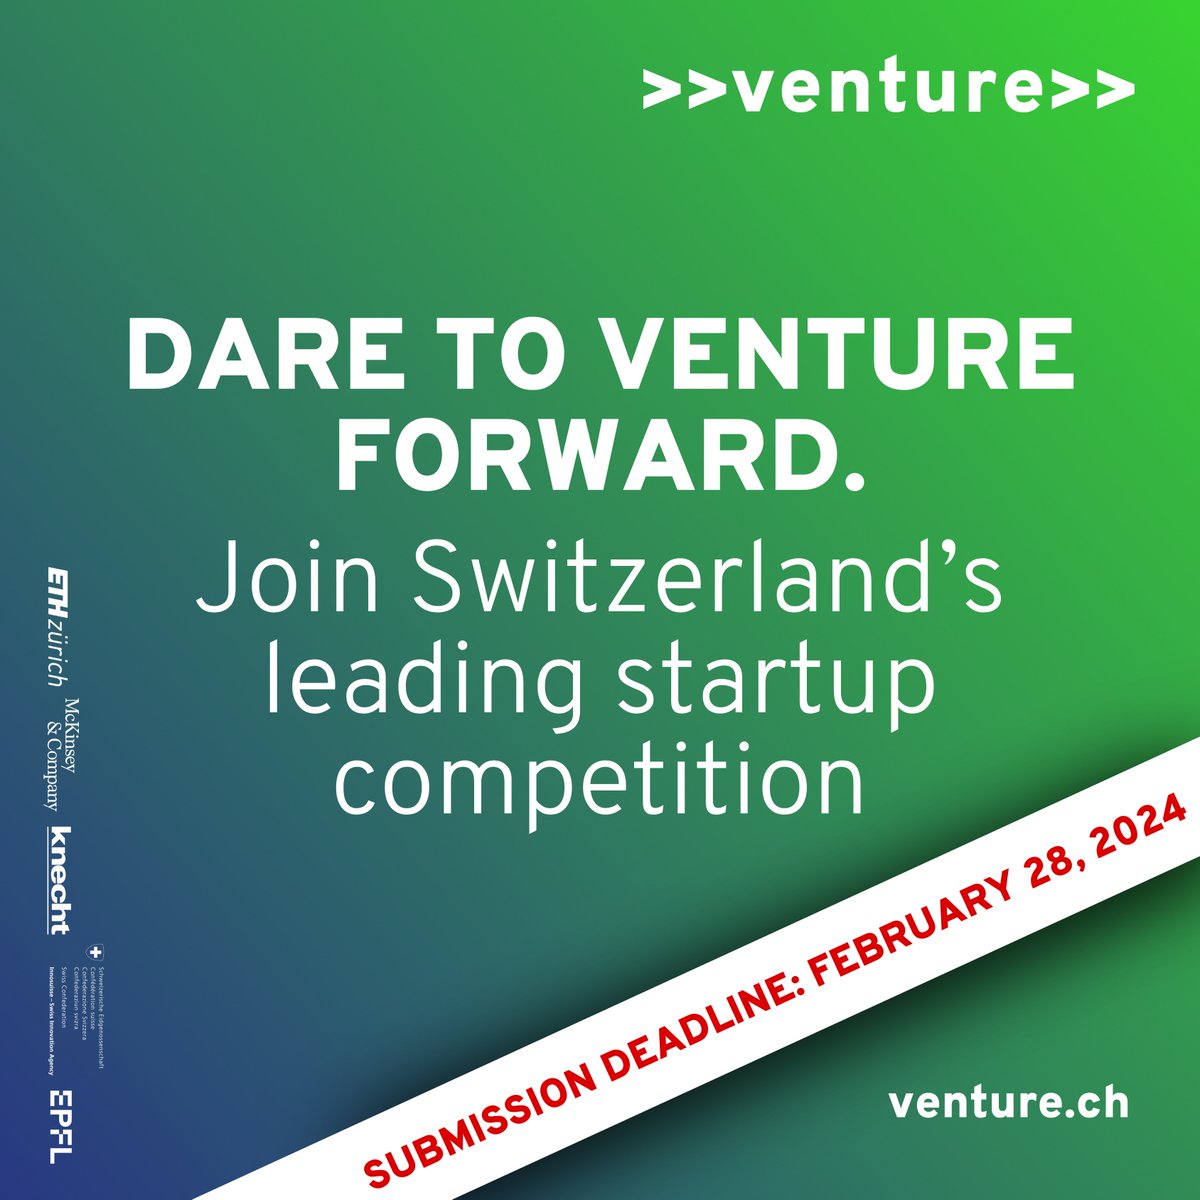 🚨 Only one month left to join Switzerland's leading startup competition! 🚨 Why participate? Up to CHF 150k in prizes, vast network of experts, potential investors, visibility for your startup... 📆 Deadline: Feb 28, 2024 📝 Apply now: venture.ch/participate Spread the word!